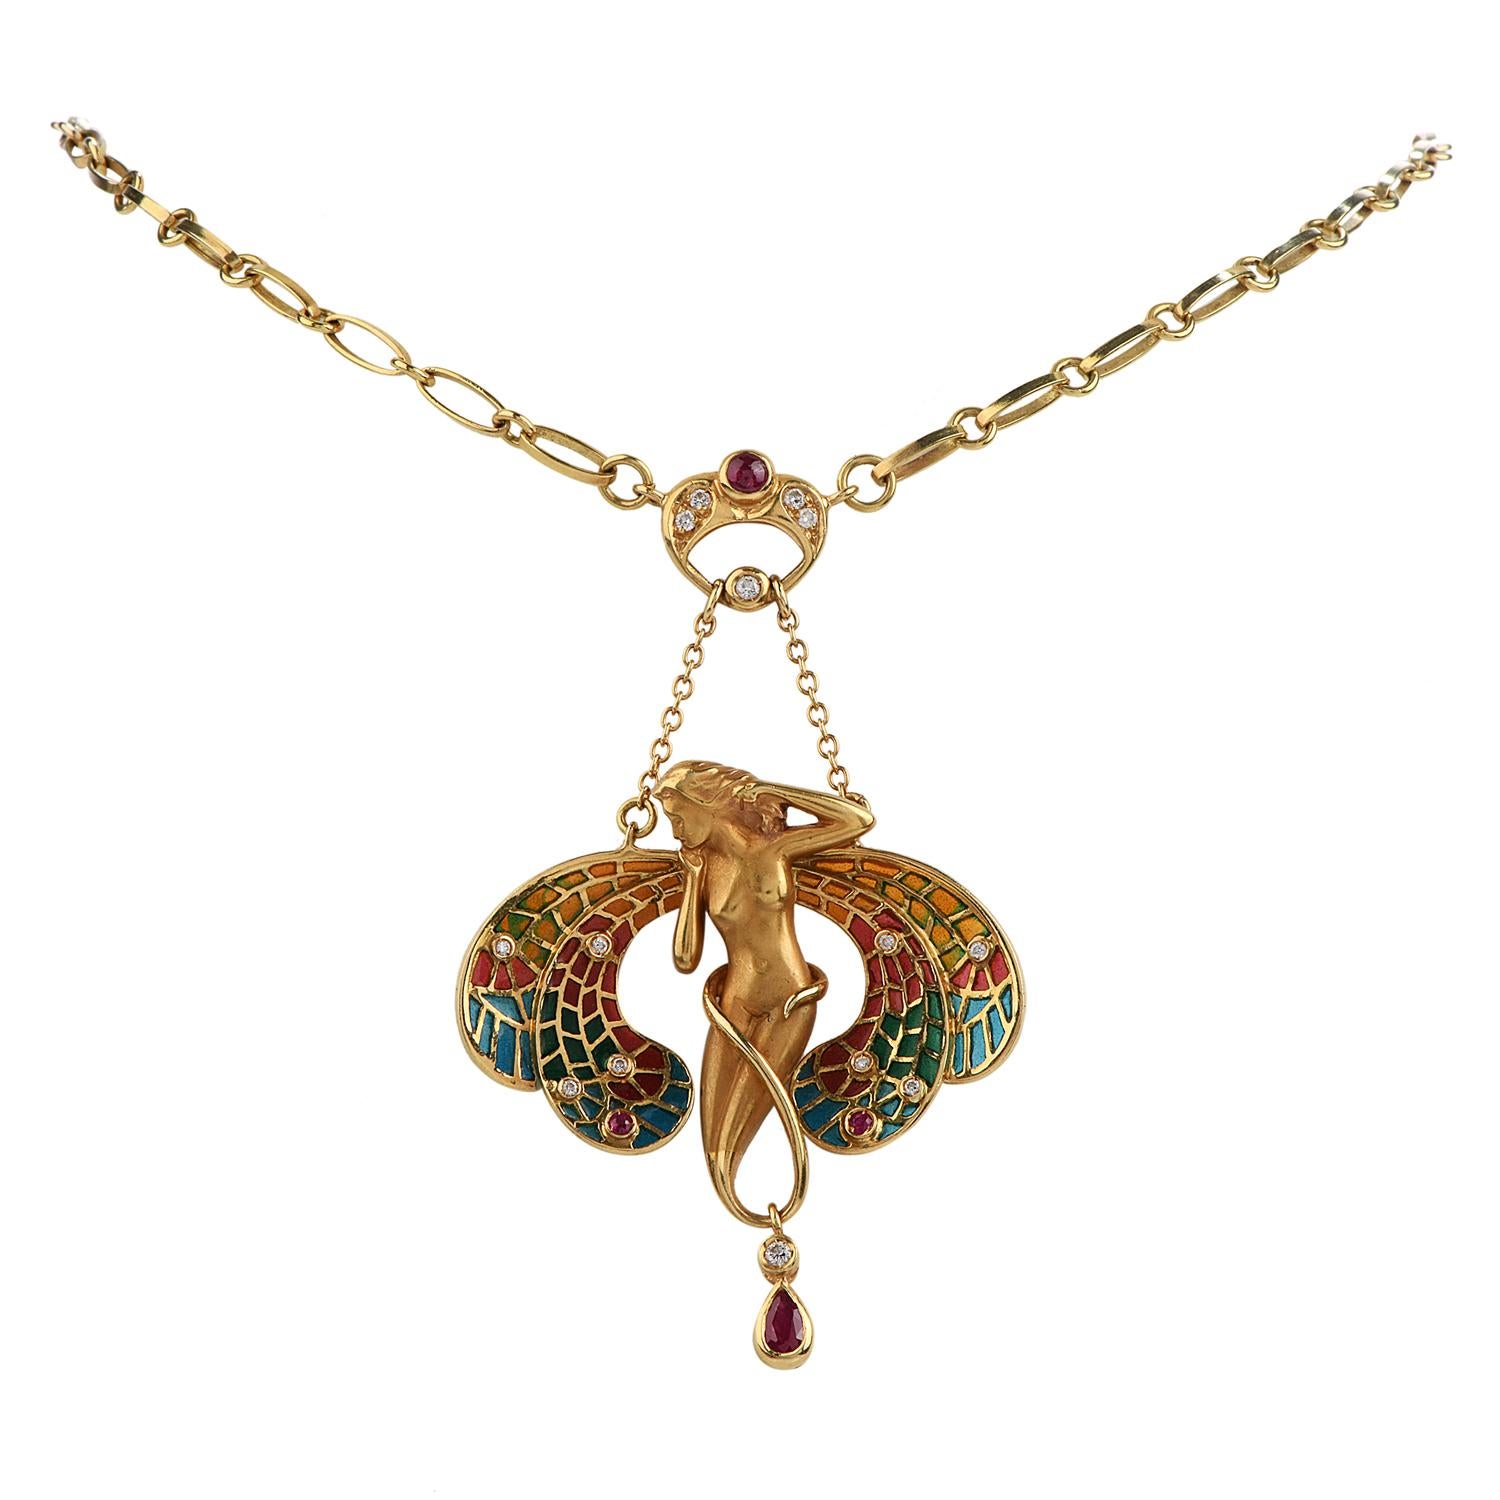 This late 20th Century Piece, was Made in Italy by the Designer TINELLI, 

It is in Excellent condition and the see-through Enamel Accents are the perfect representation of the Plique-A-Jour,

From the Art Nouveau Style of Art!

Crafted in Solid 18K